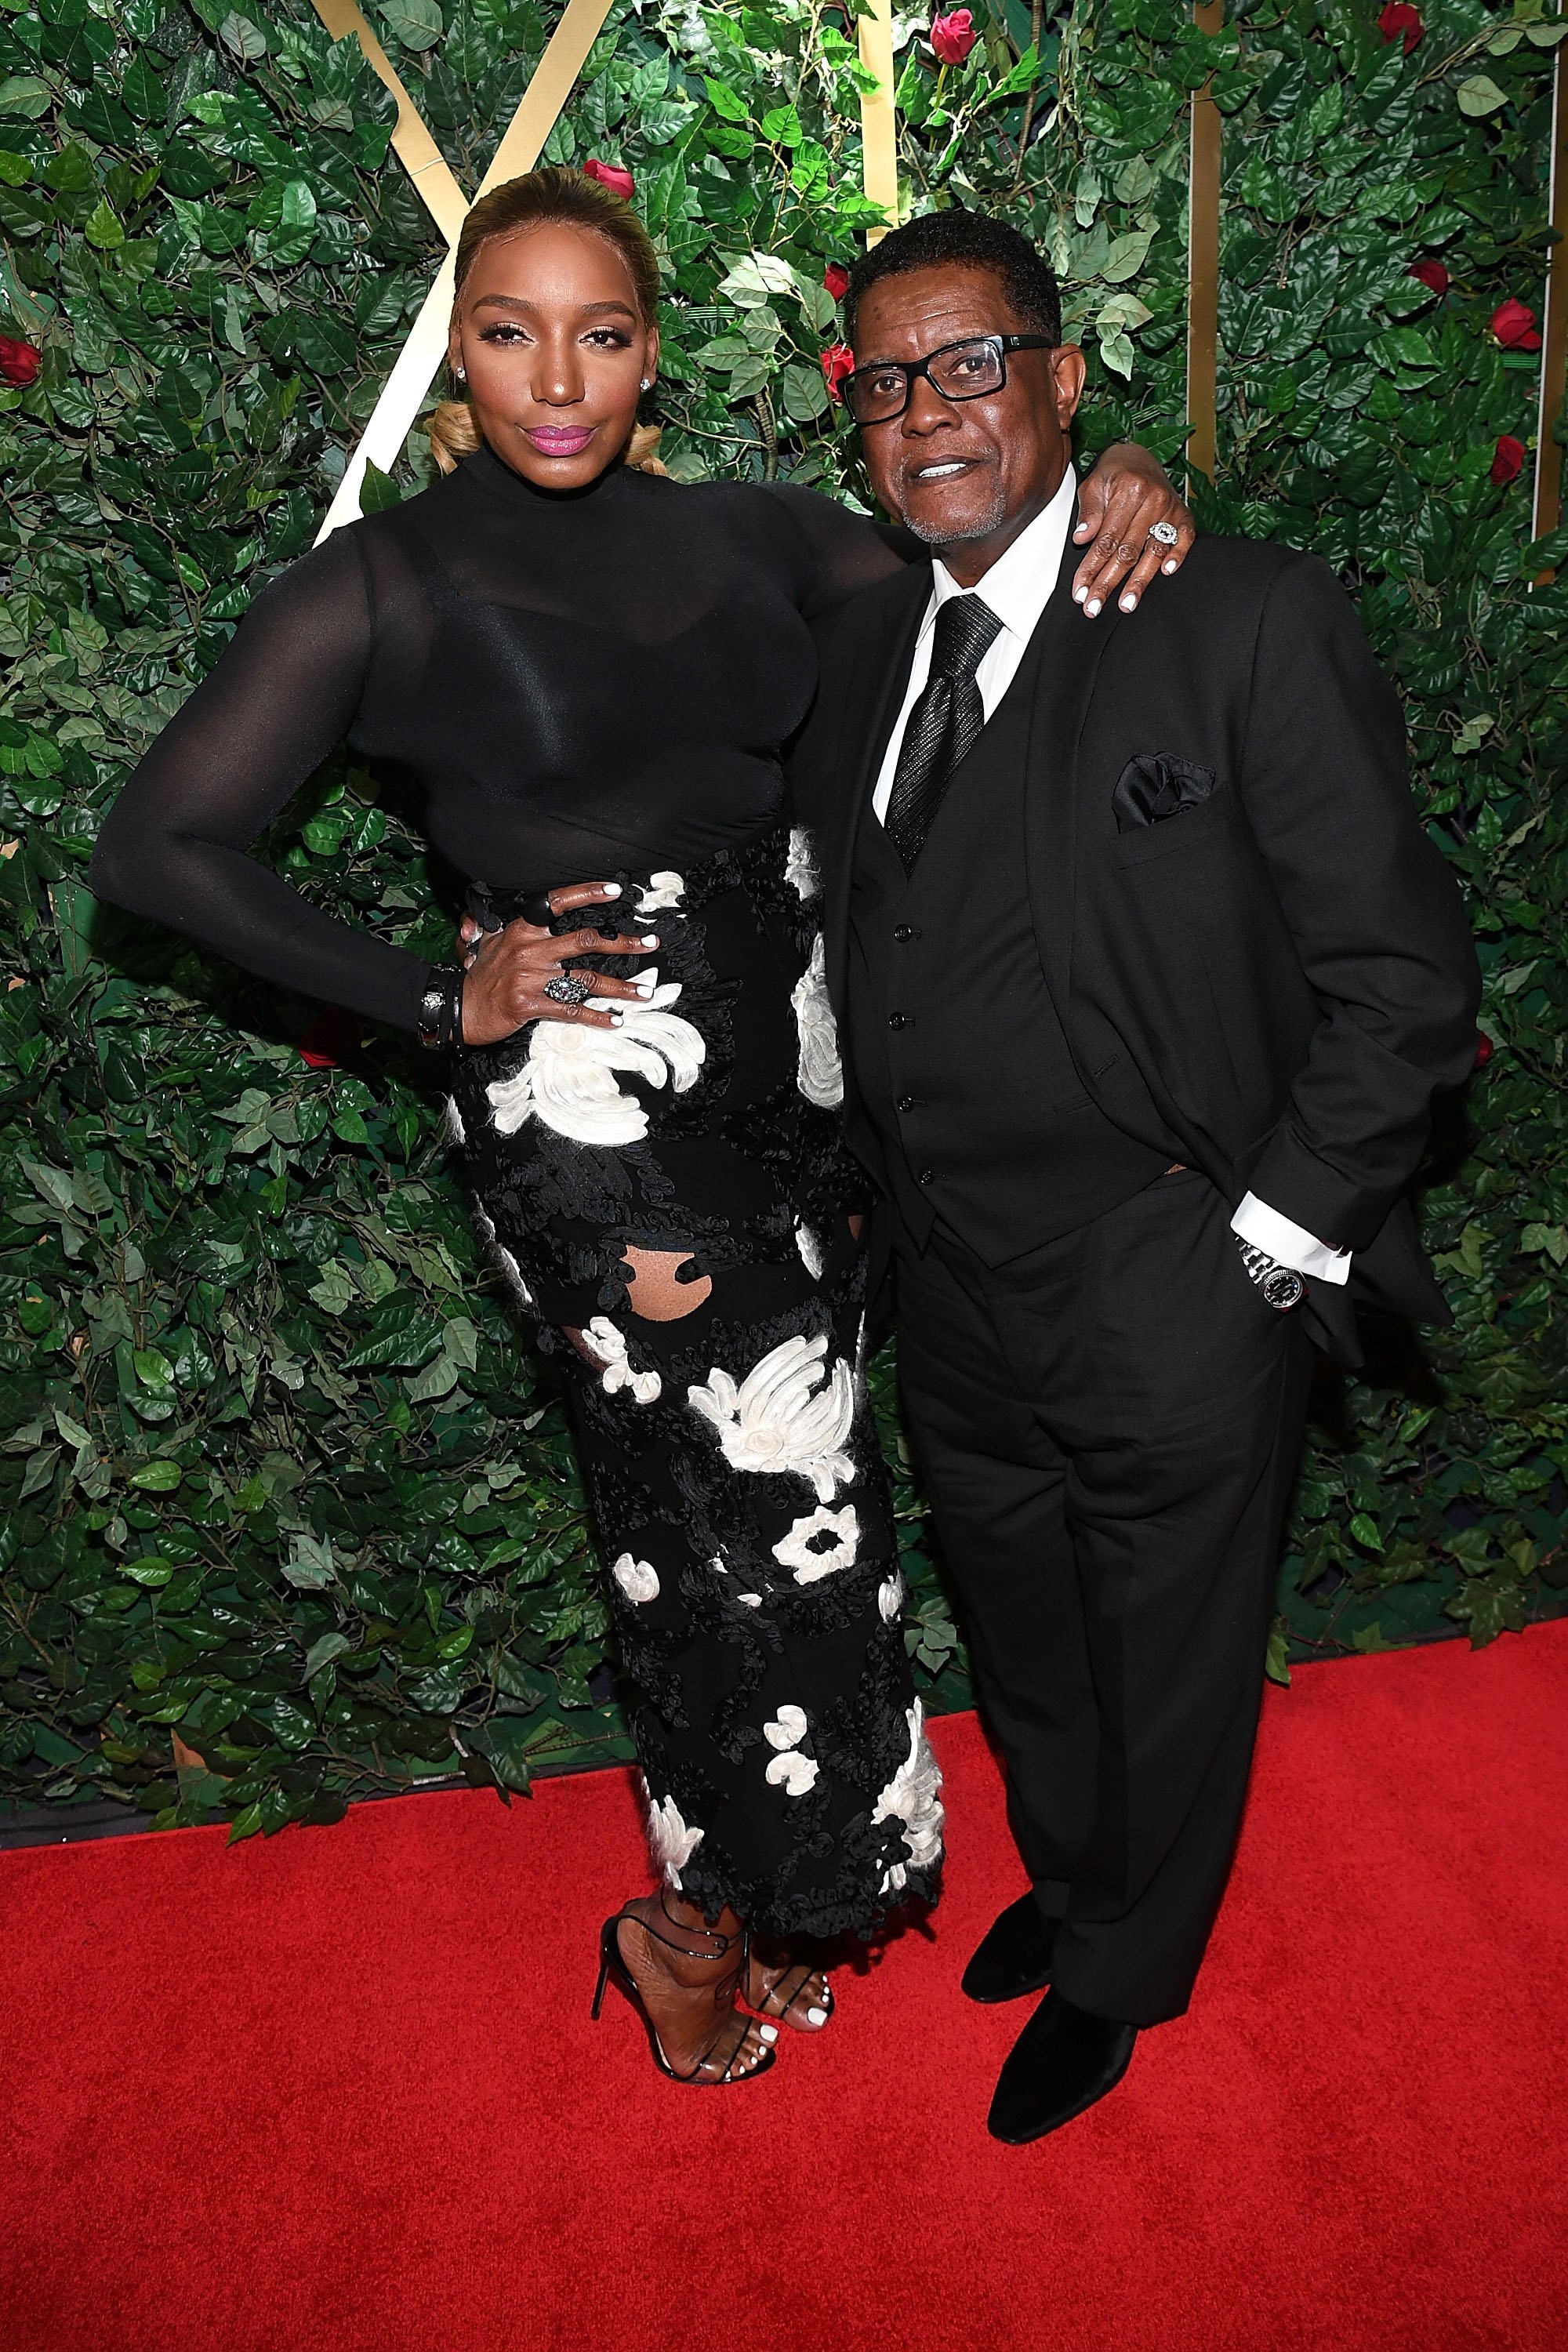 Nene Leakes and her husband Gregg Leakes | Photo: Getty Images